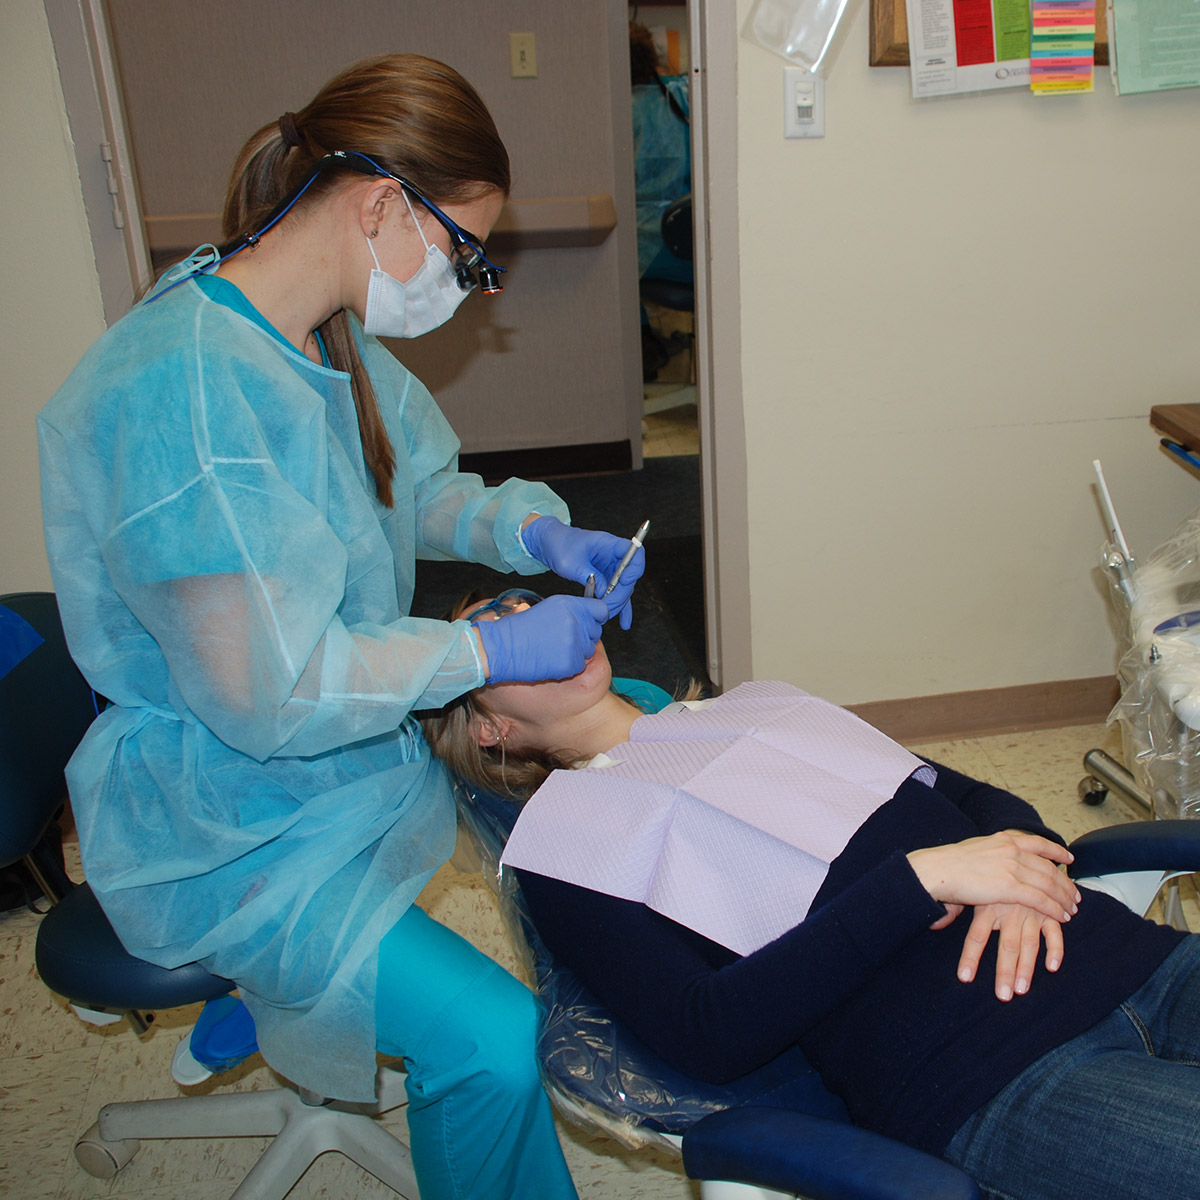 CCD Dental Hygiene student with a patient